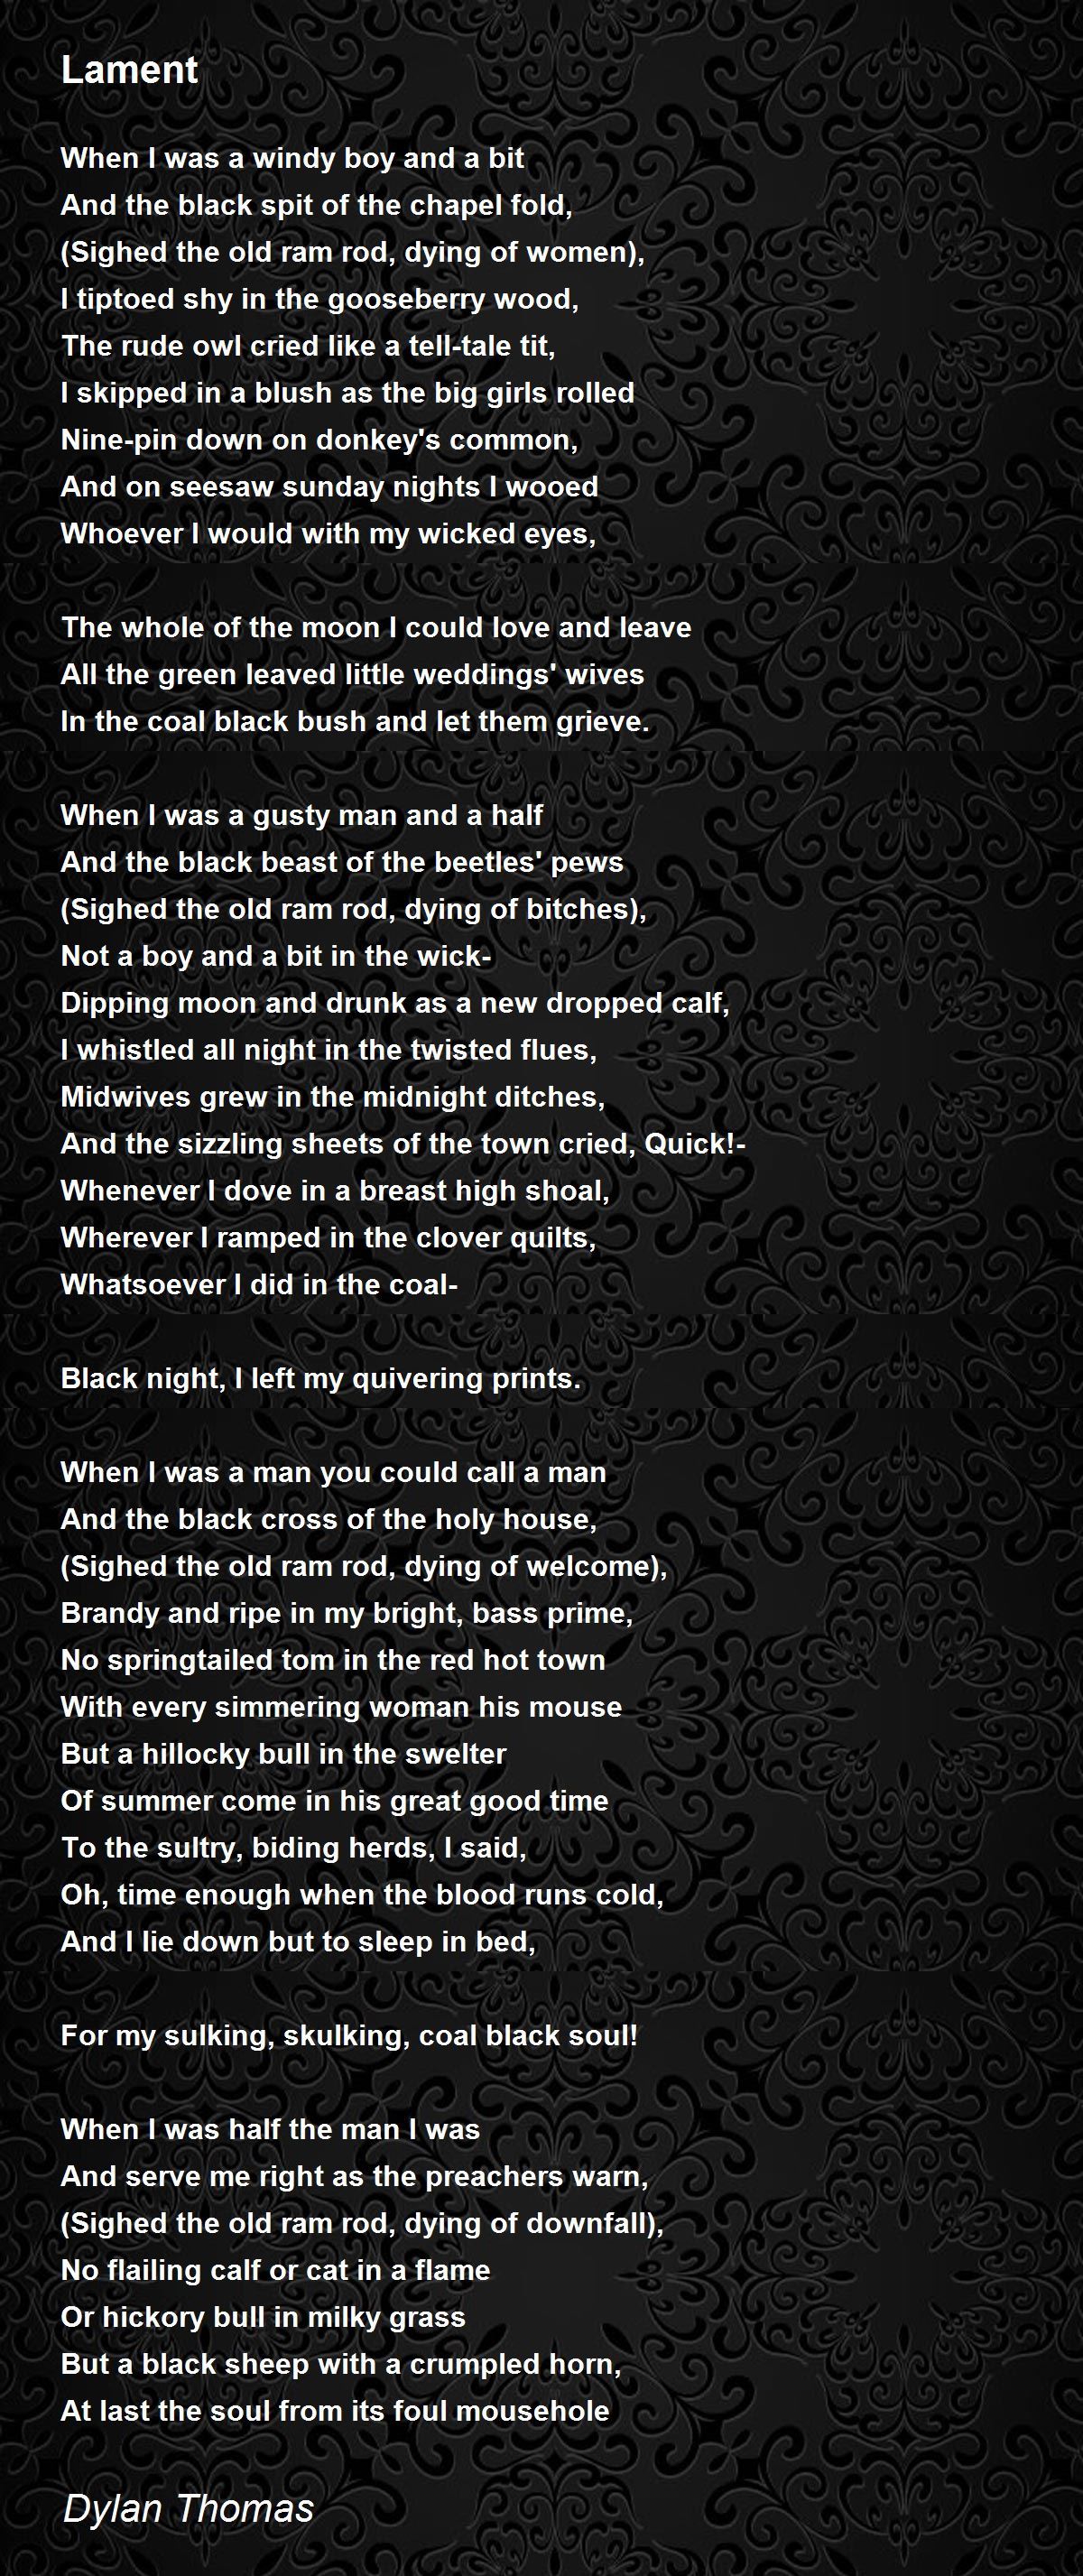 Lament Poem by Dylan Thomas - Poem Hunter Comments